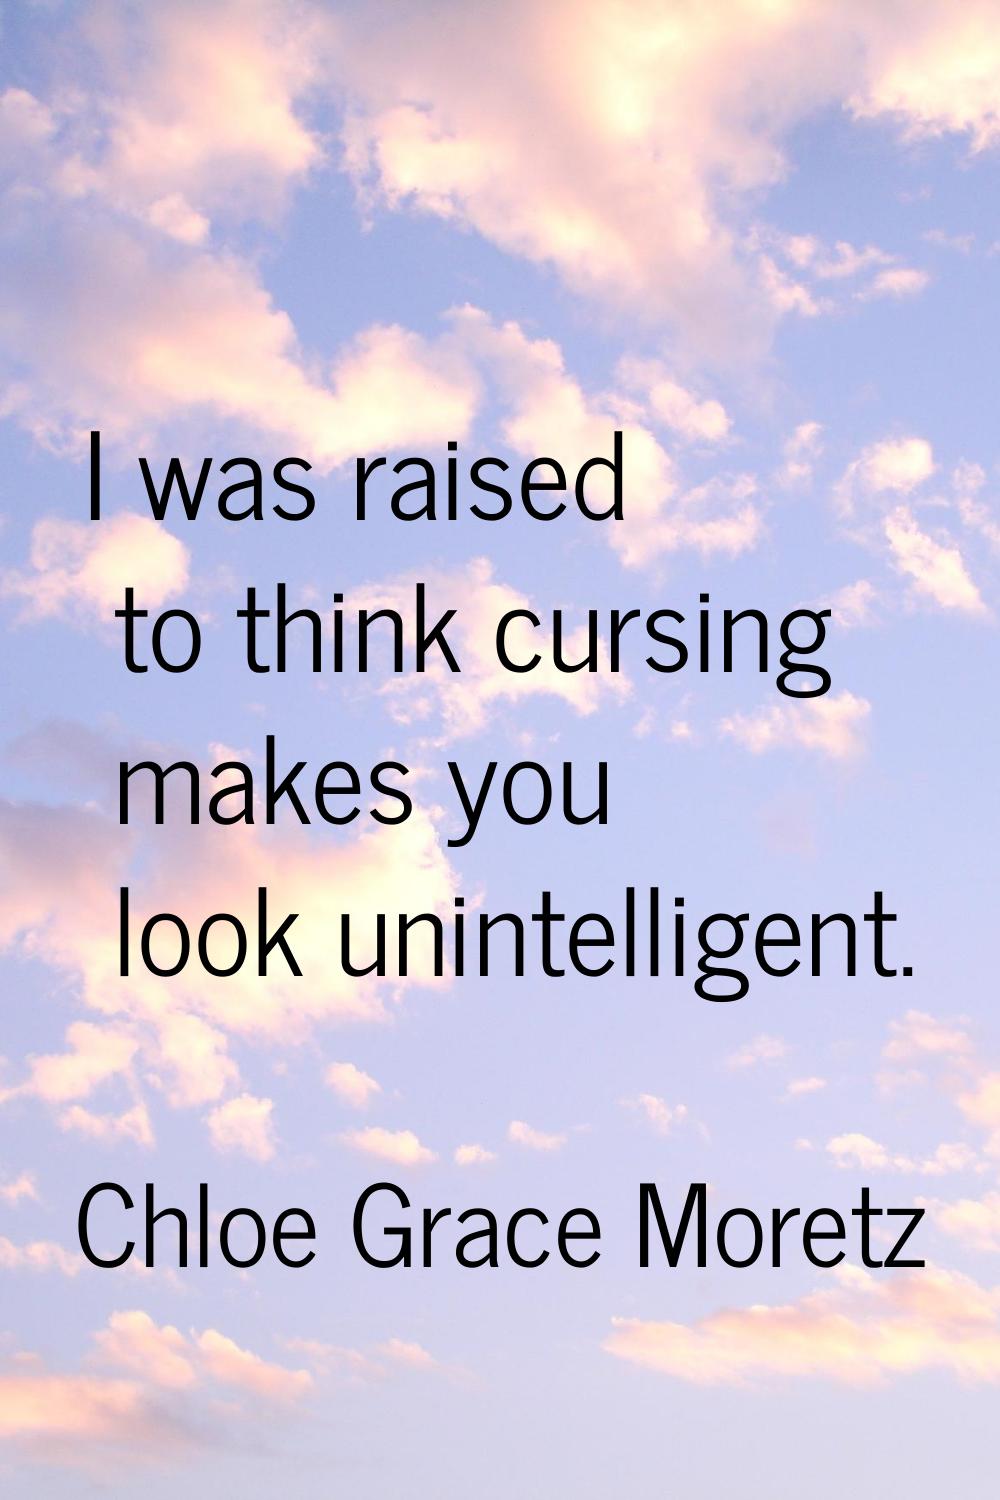 I was raised to think cursing makes you look unintelligent.